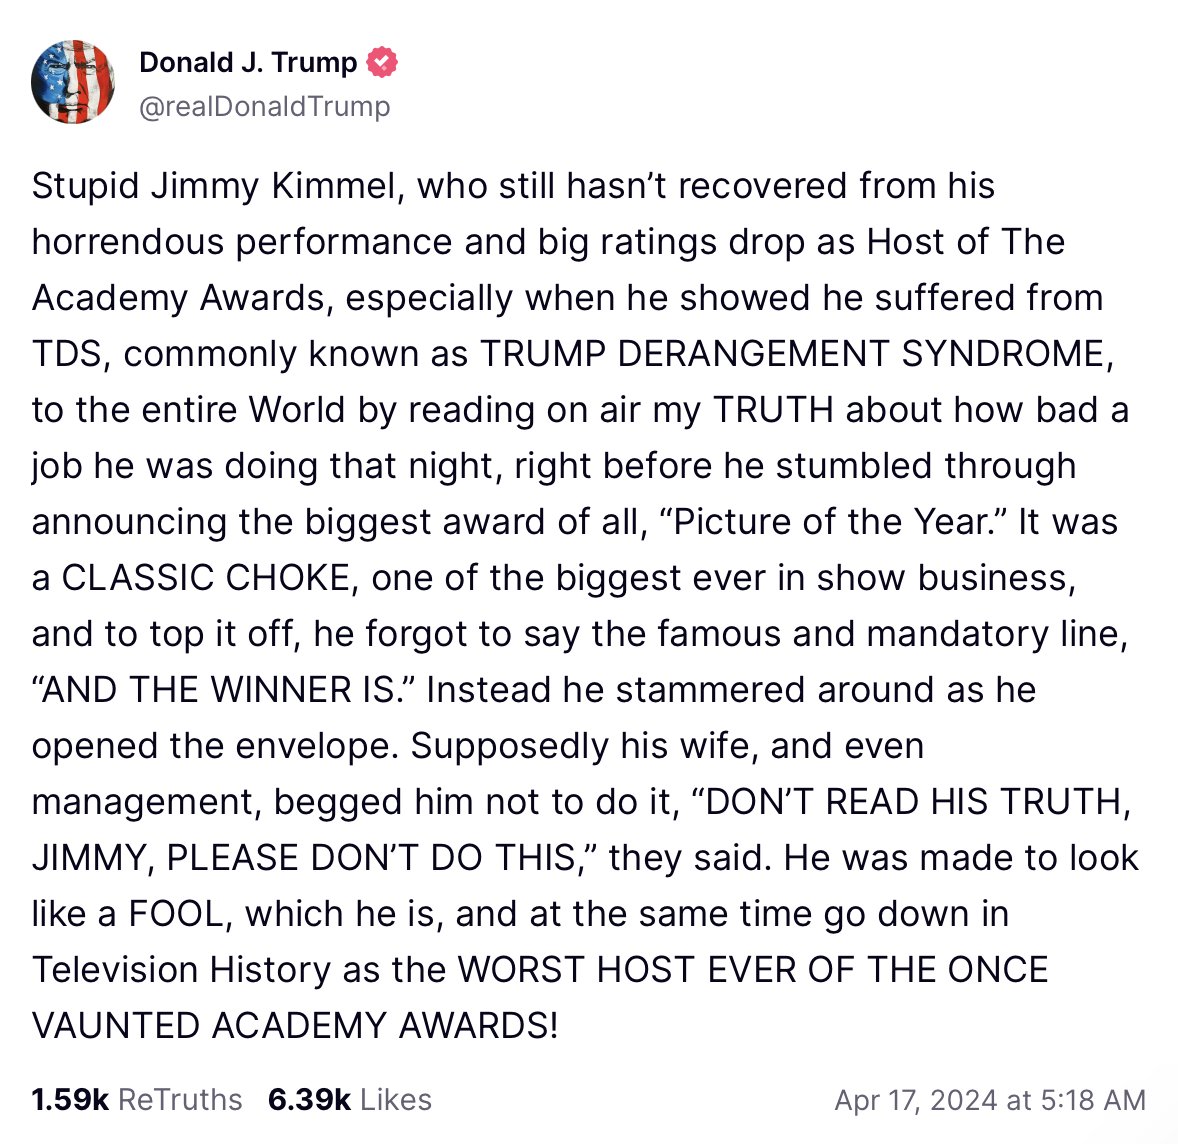 'Stupid Jimmy Kimmel, He was made to look a FOOL, WHICH HE IS.' 🤣😂